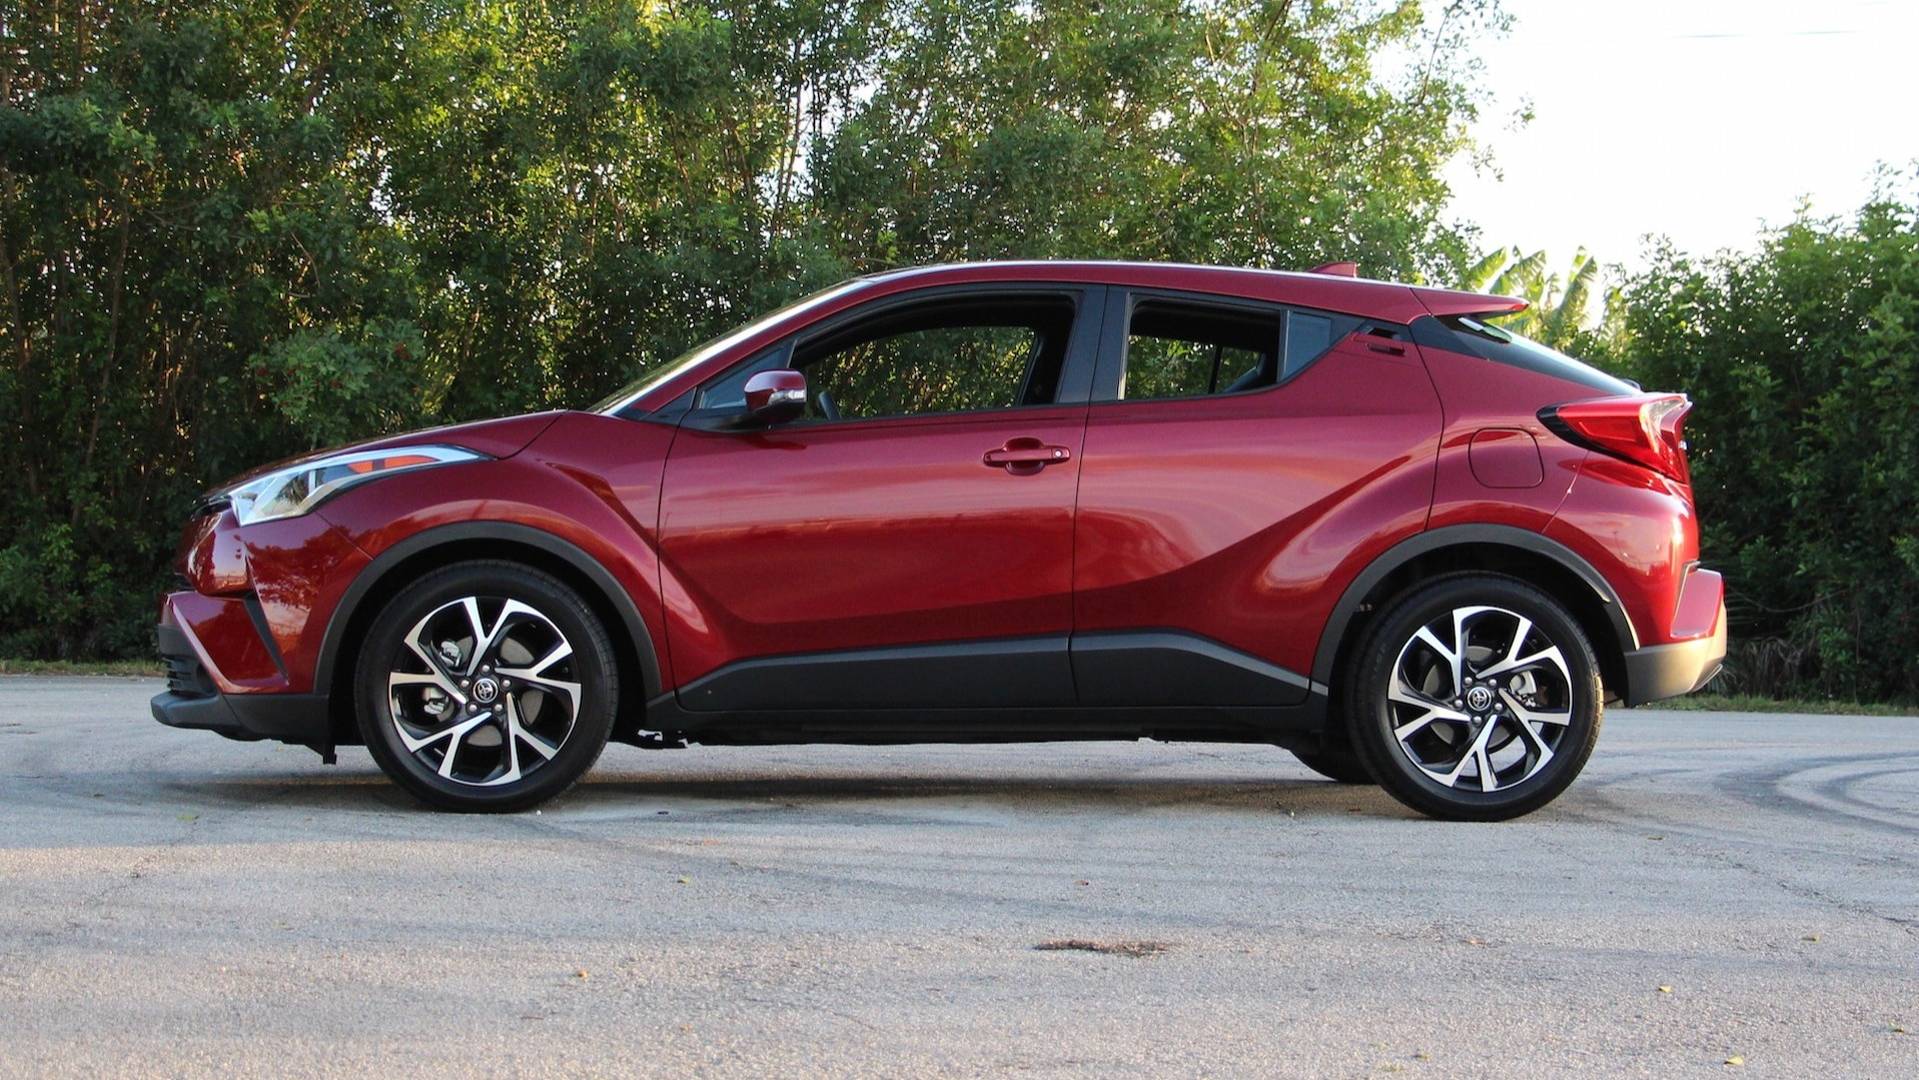 2018 Toyota C-HR Review: Fun And Funky, But Flawed